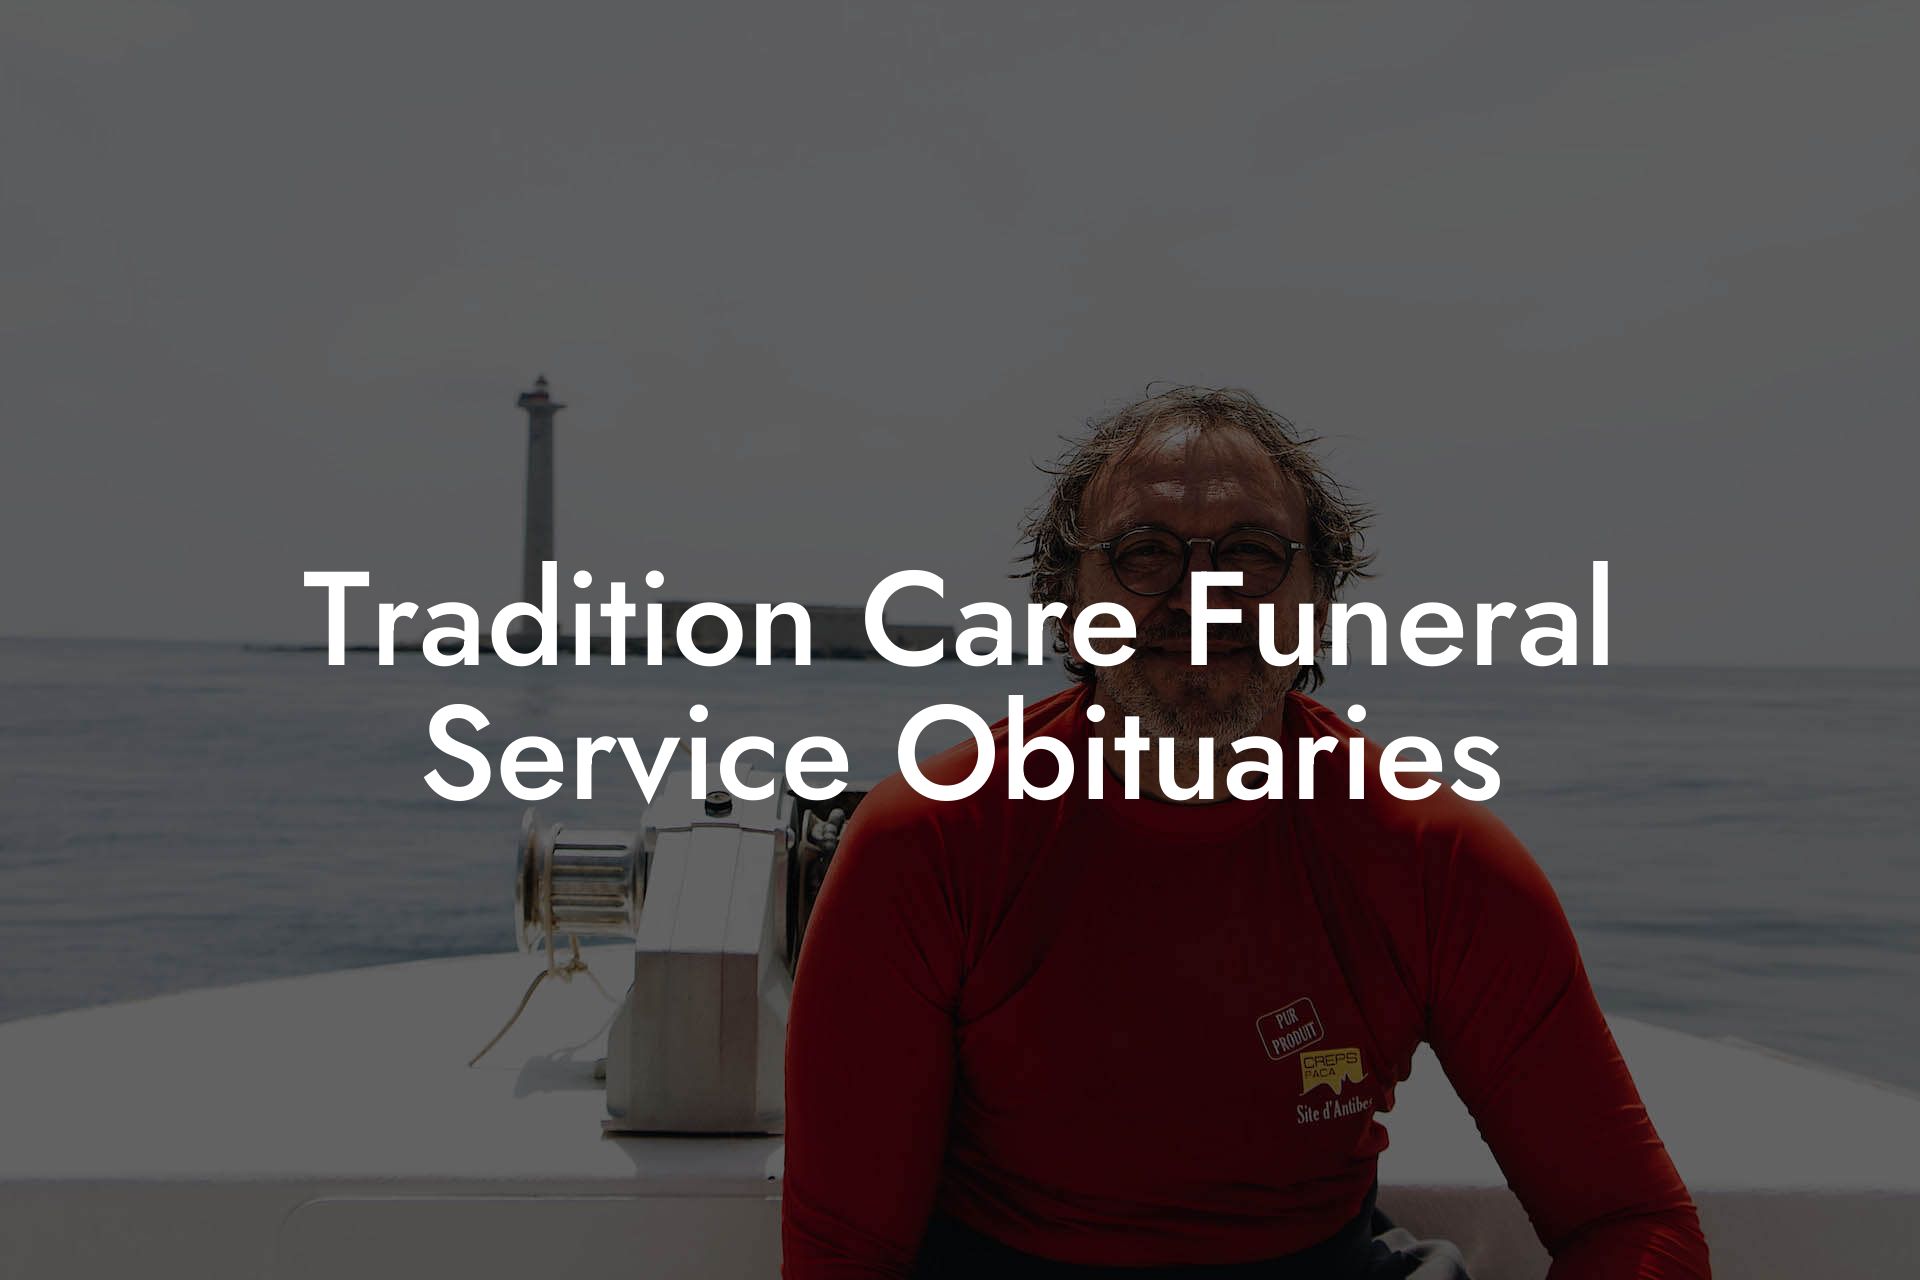 Tradition Care Funeral Service Obituaries